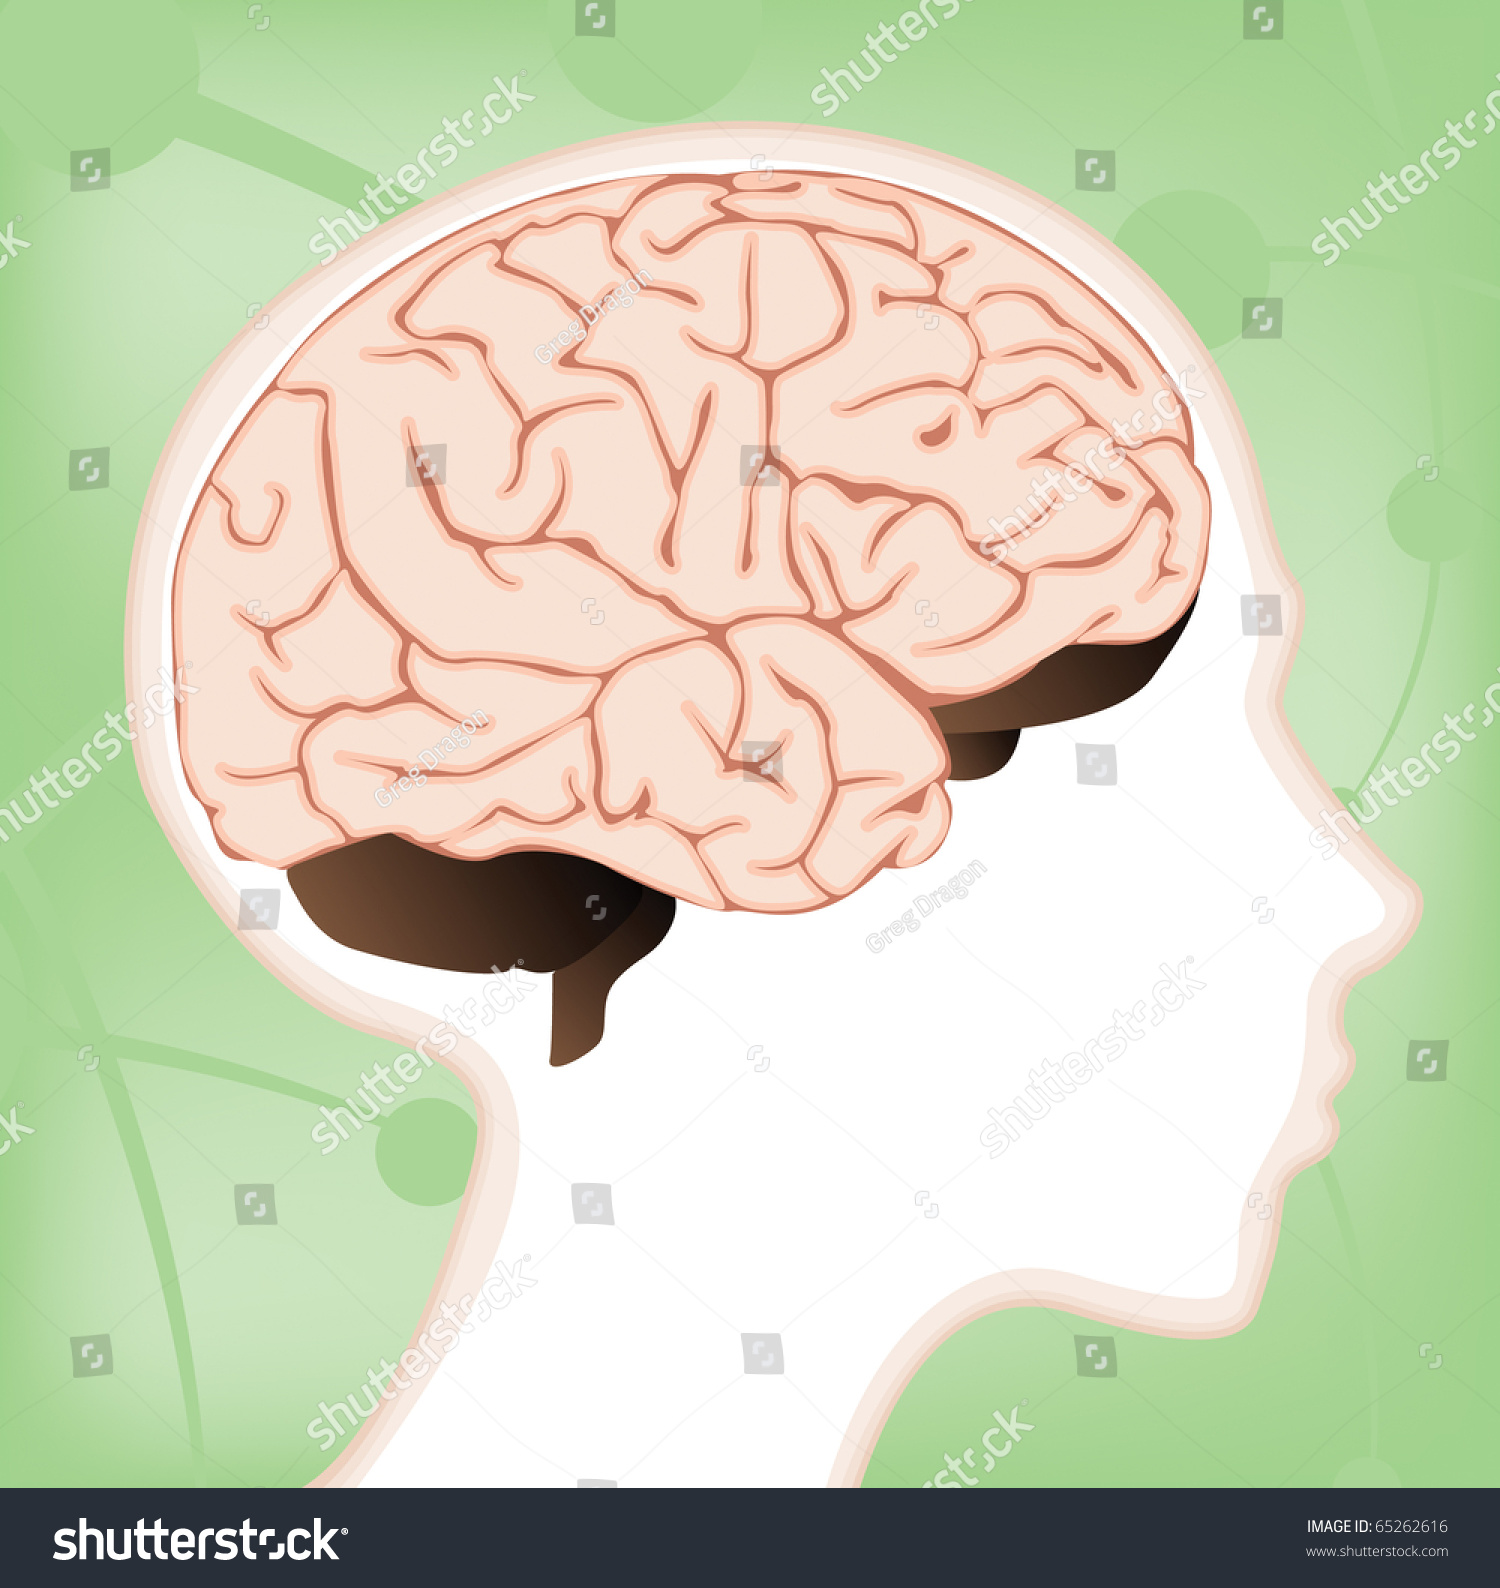 A Vector Brain Diagram Within A Child'S Head With Lobes ...